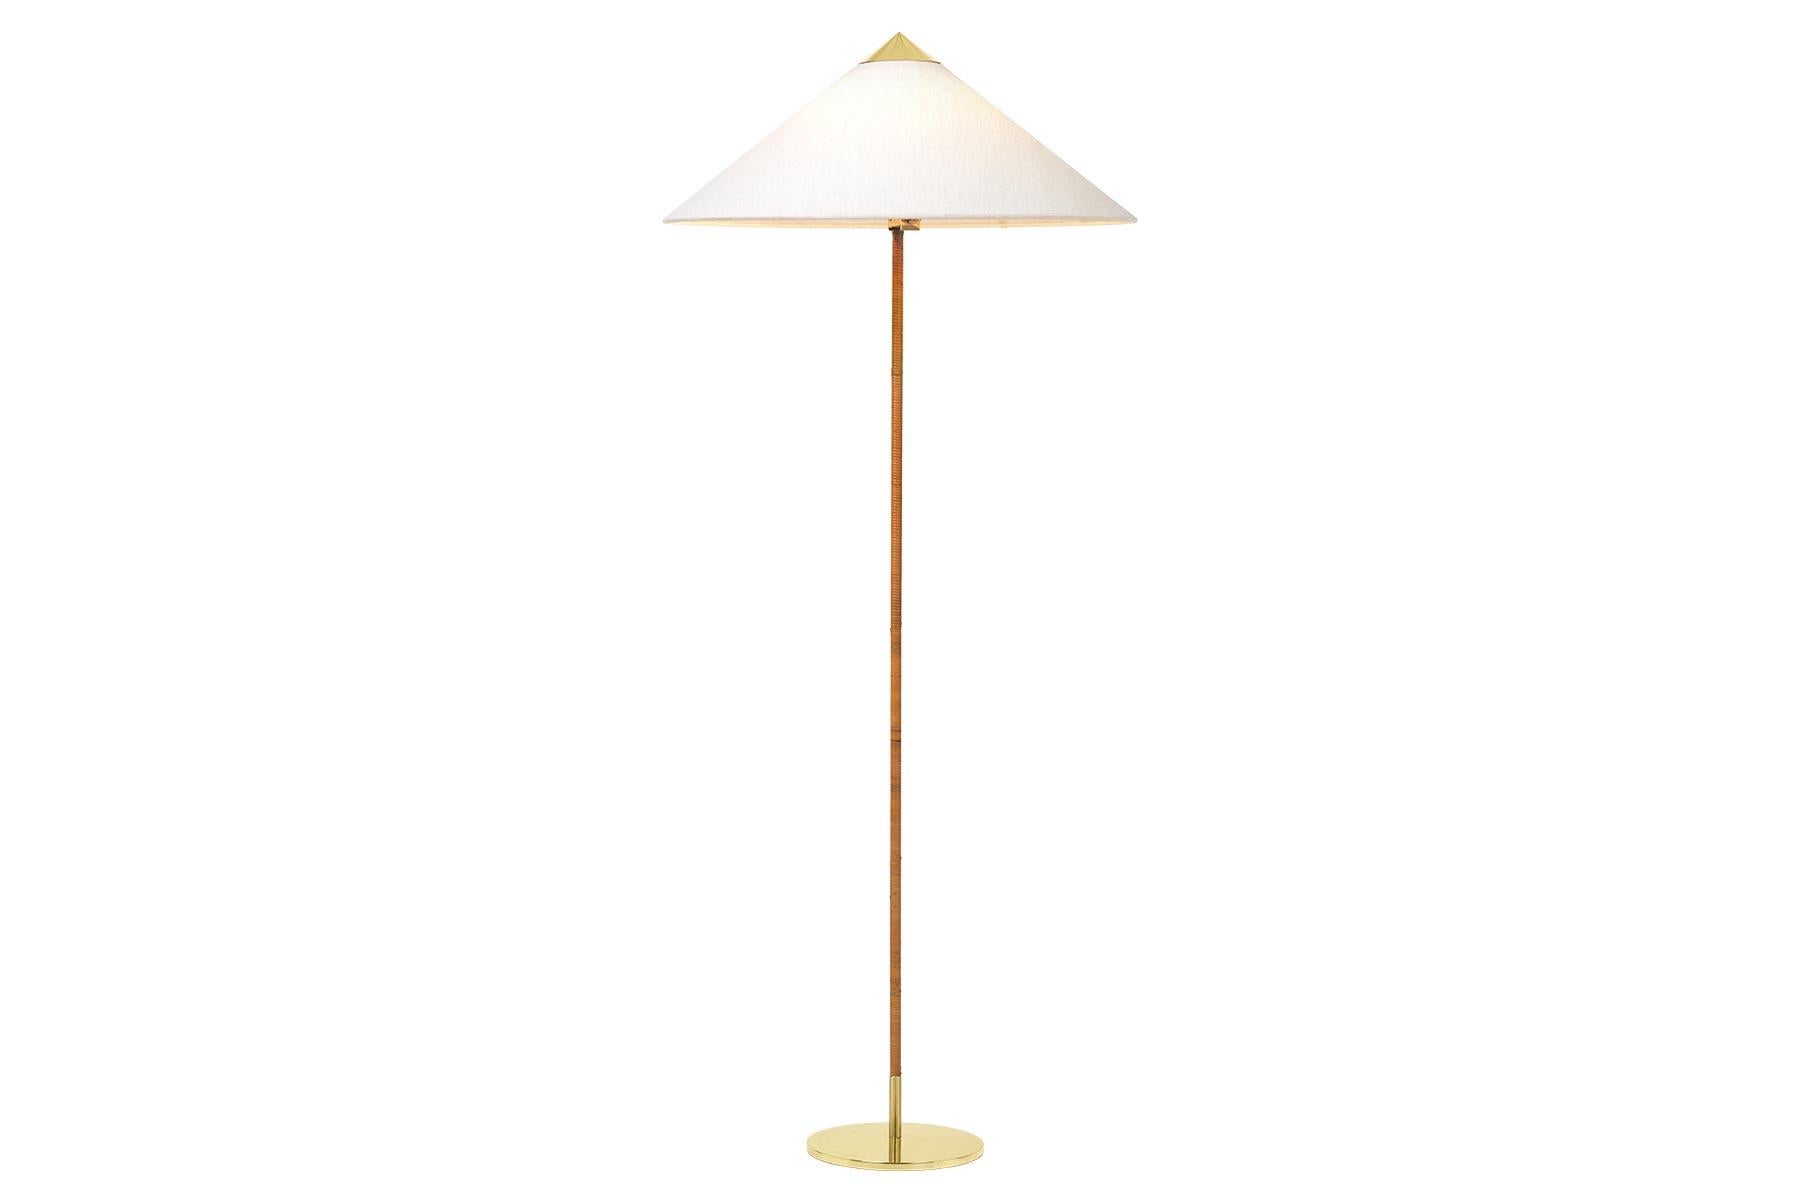 Replacement canvas shade for the 9602 floor lamp, also known as “Chinese Hat”, designed by Paavo Tynell in 1935 for the Hotel Aulanko. 